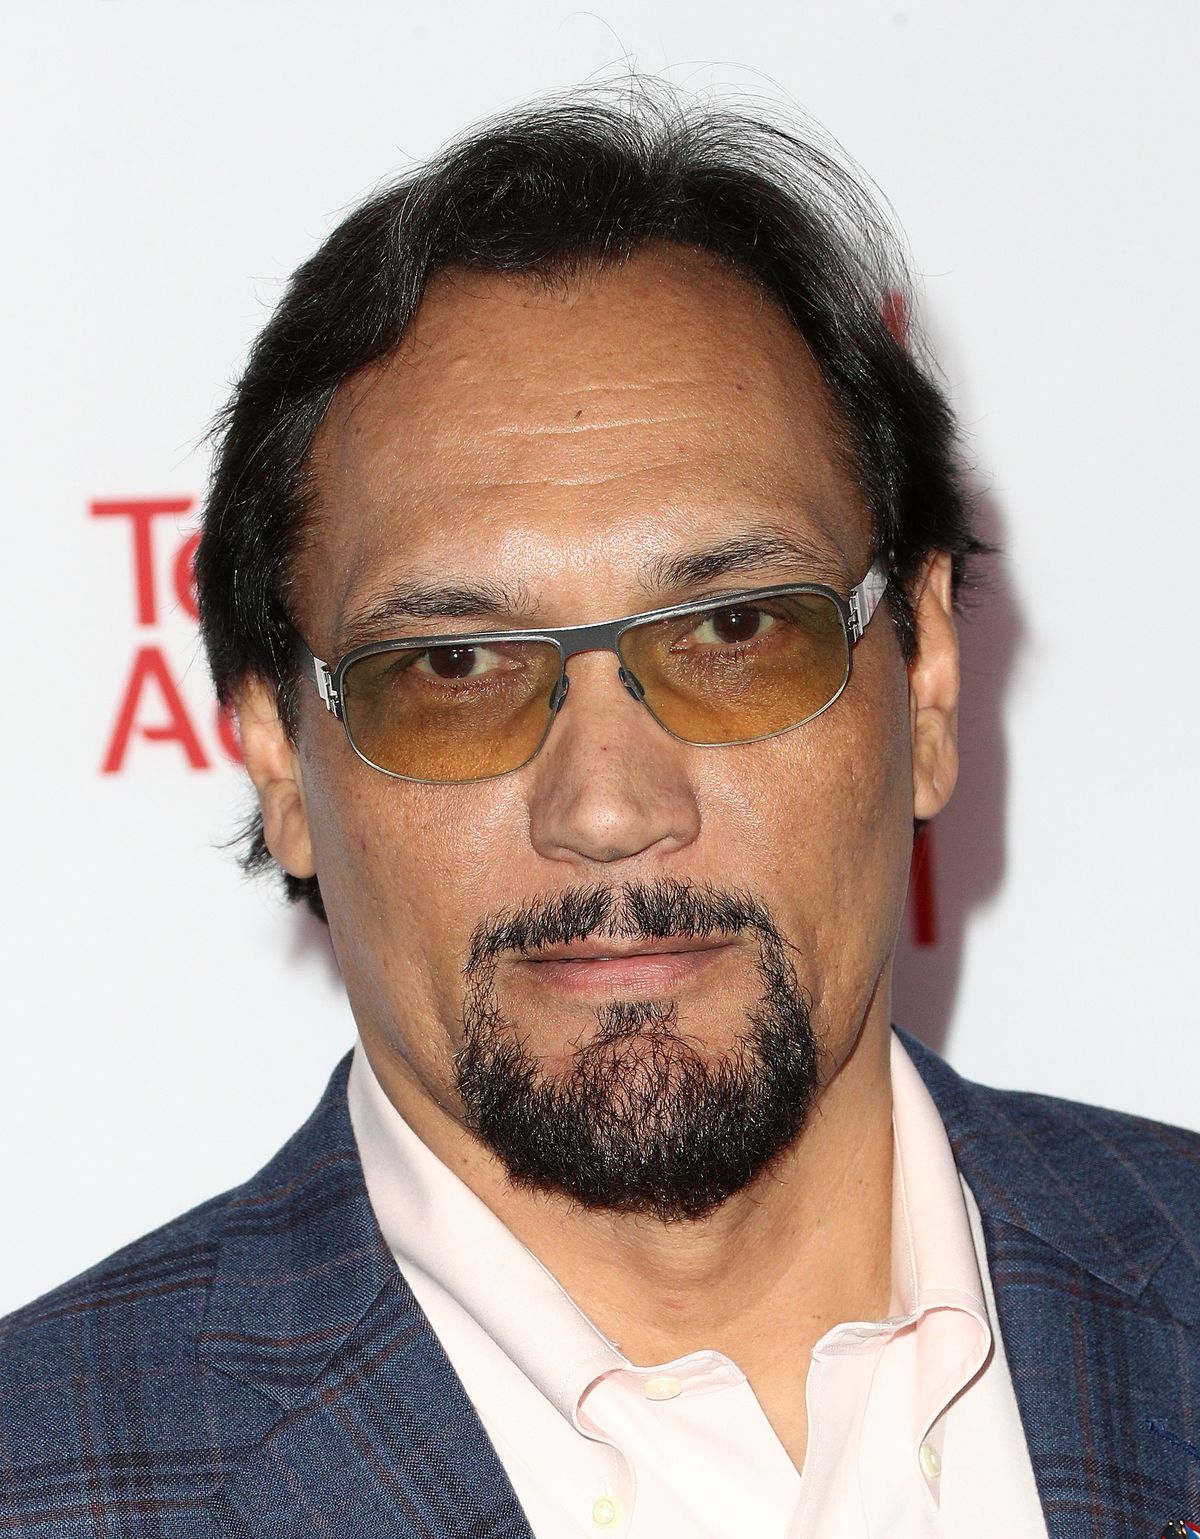 Jimmy Smits at the Television Academy's 24th Hall of Fame Ceremony on November 15, 2017, in North Hollywood, California | Photo: Frederick M. Brown/Getty Images